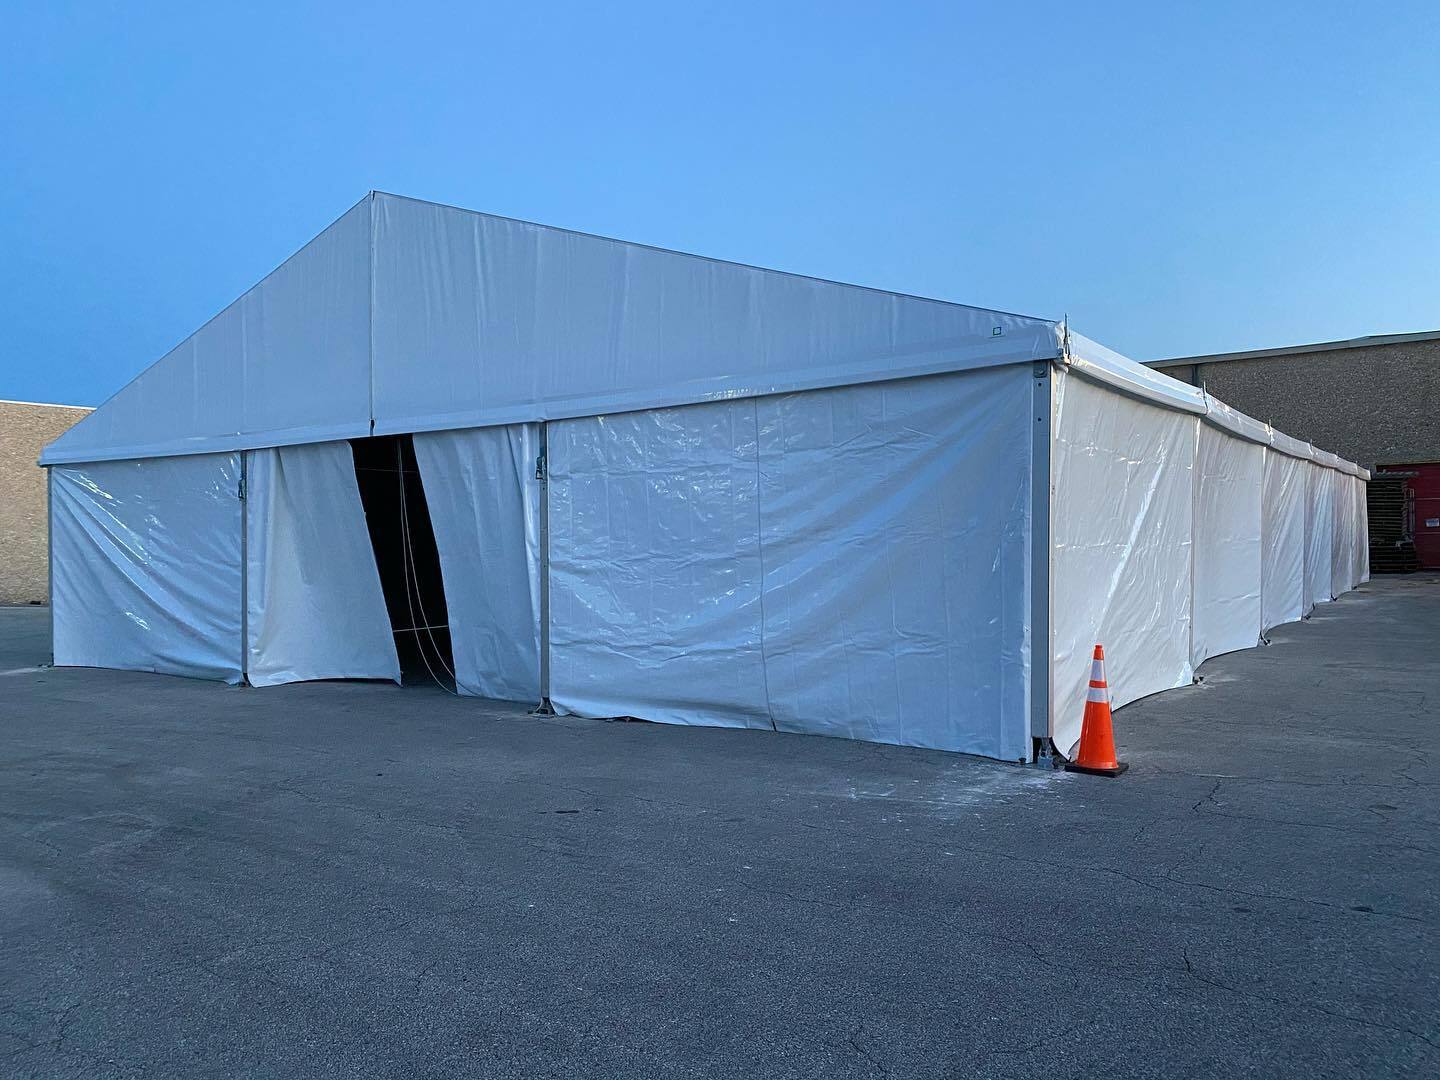 Structure Tent